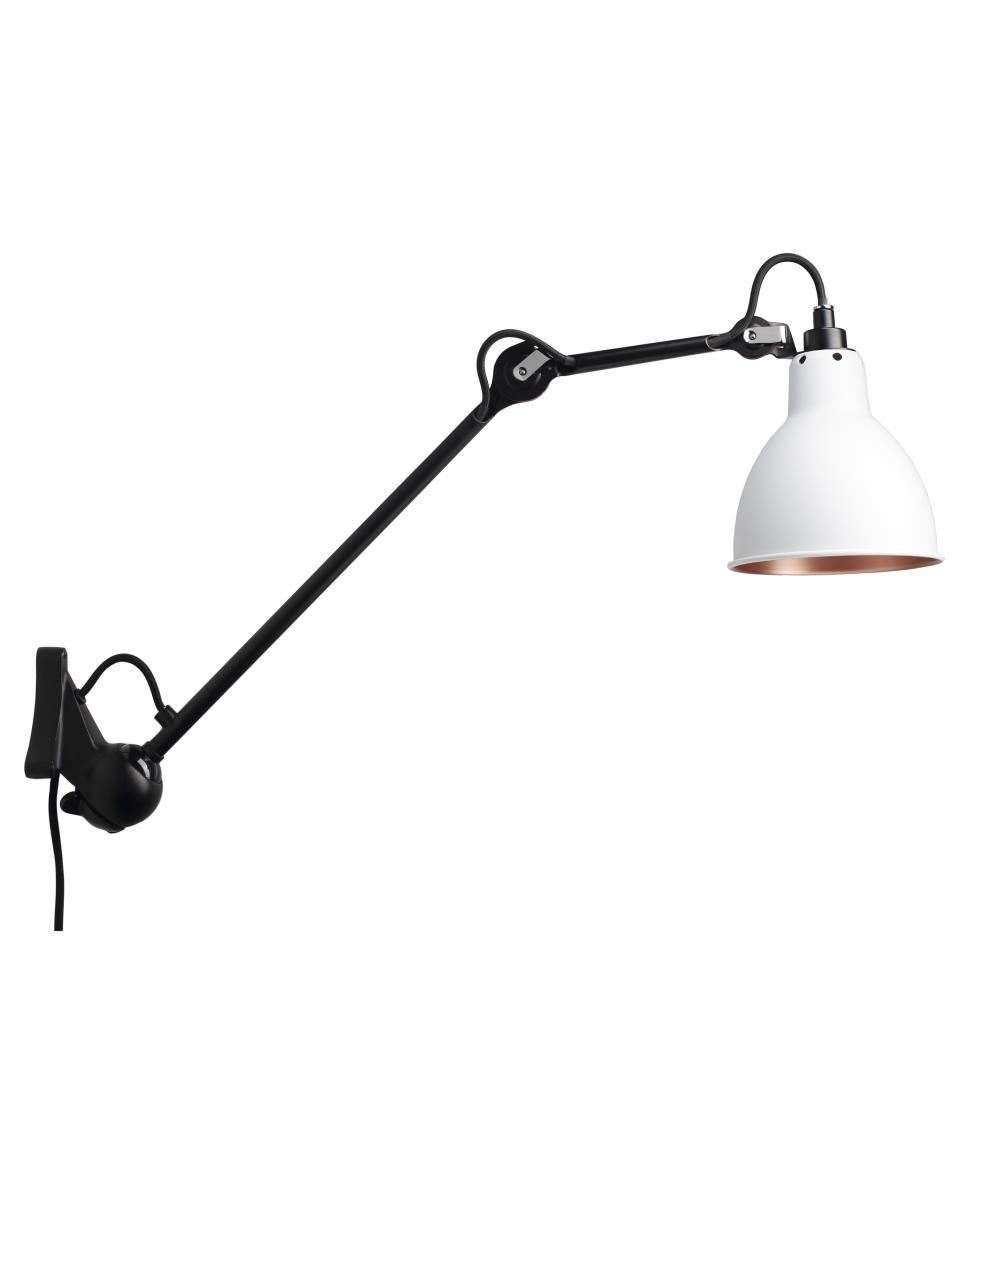 Lampe Gras 222 Wall Light Black Arm White Shade With Copper Interior Round Shade